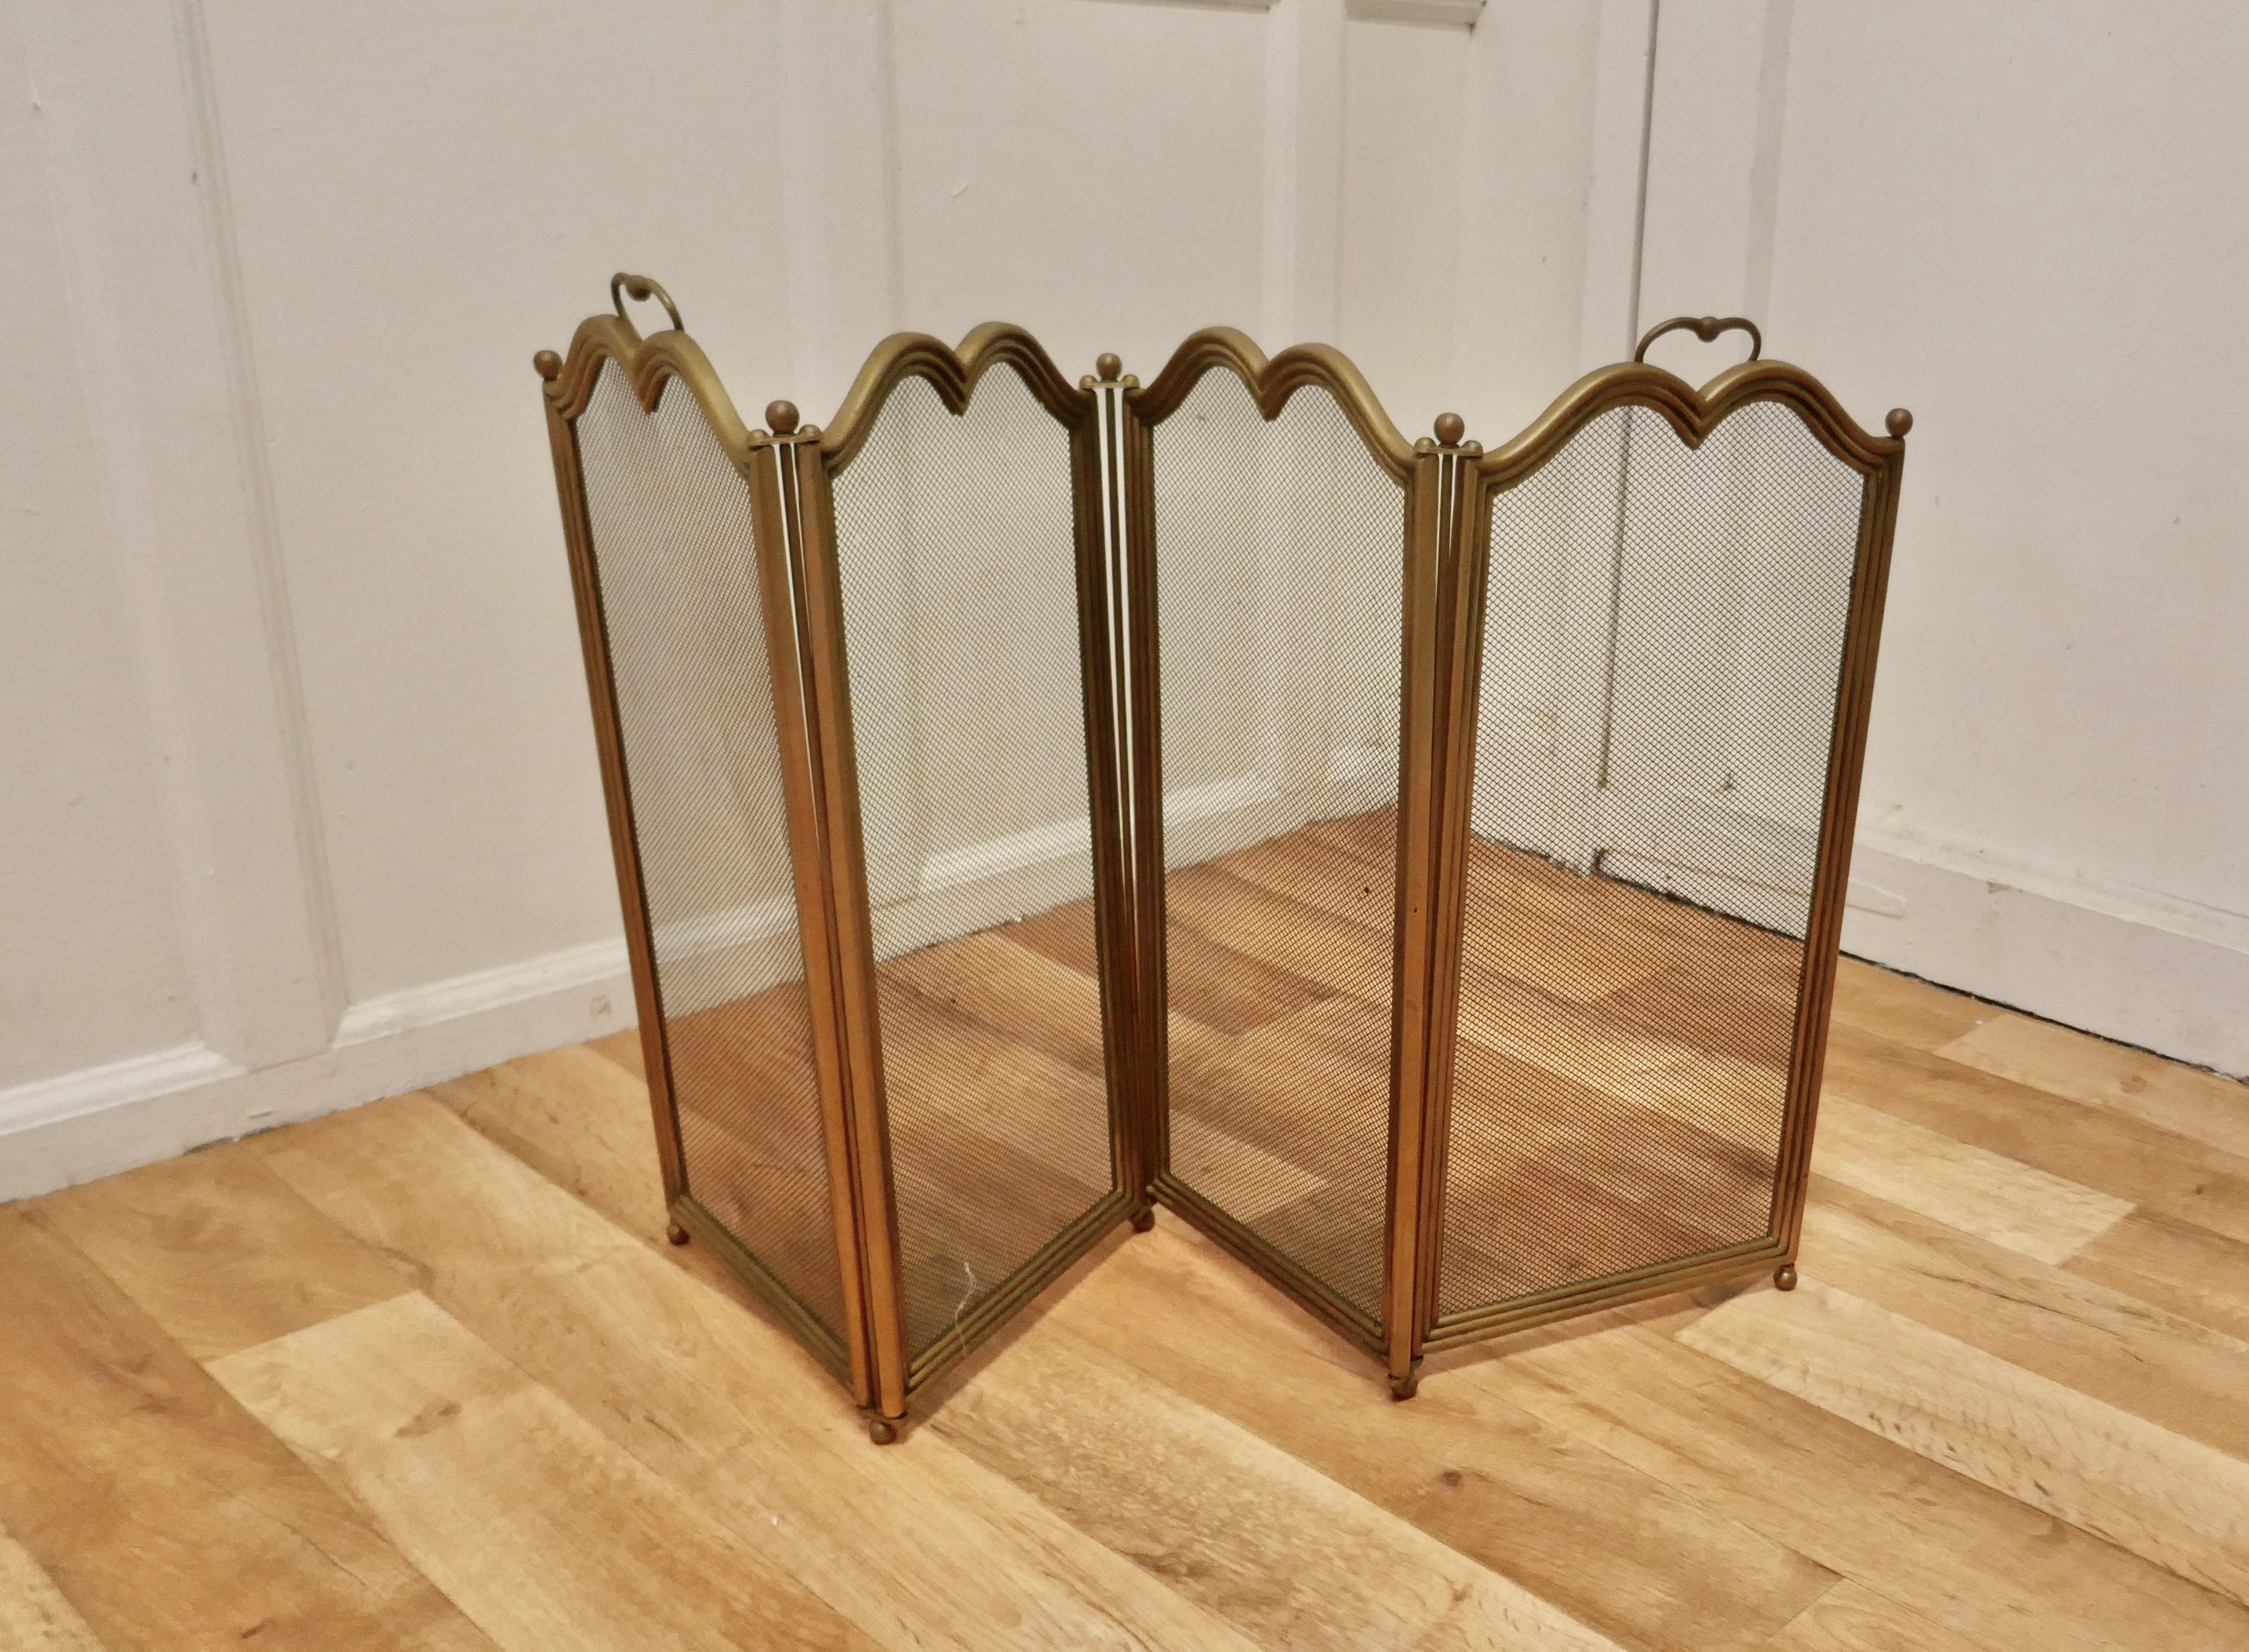 4 Fold Brass Fire Guard for Inglenook Fireplace

This very useful spark guard has a 4 fold brass frame and a fine mesh infill with a wavy brass border along the top and 2 carrying handles.
When opened out the screen can be shaped to enclose your